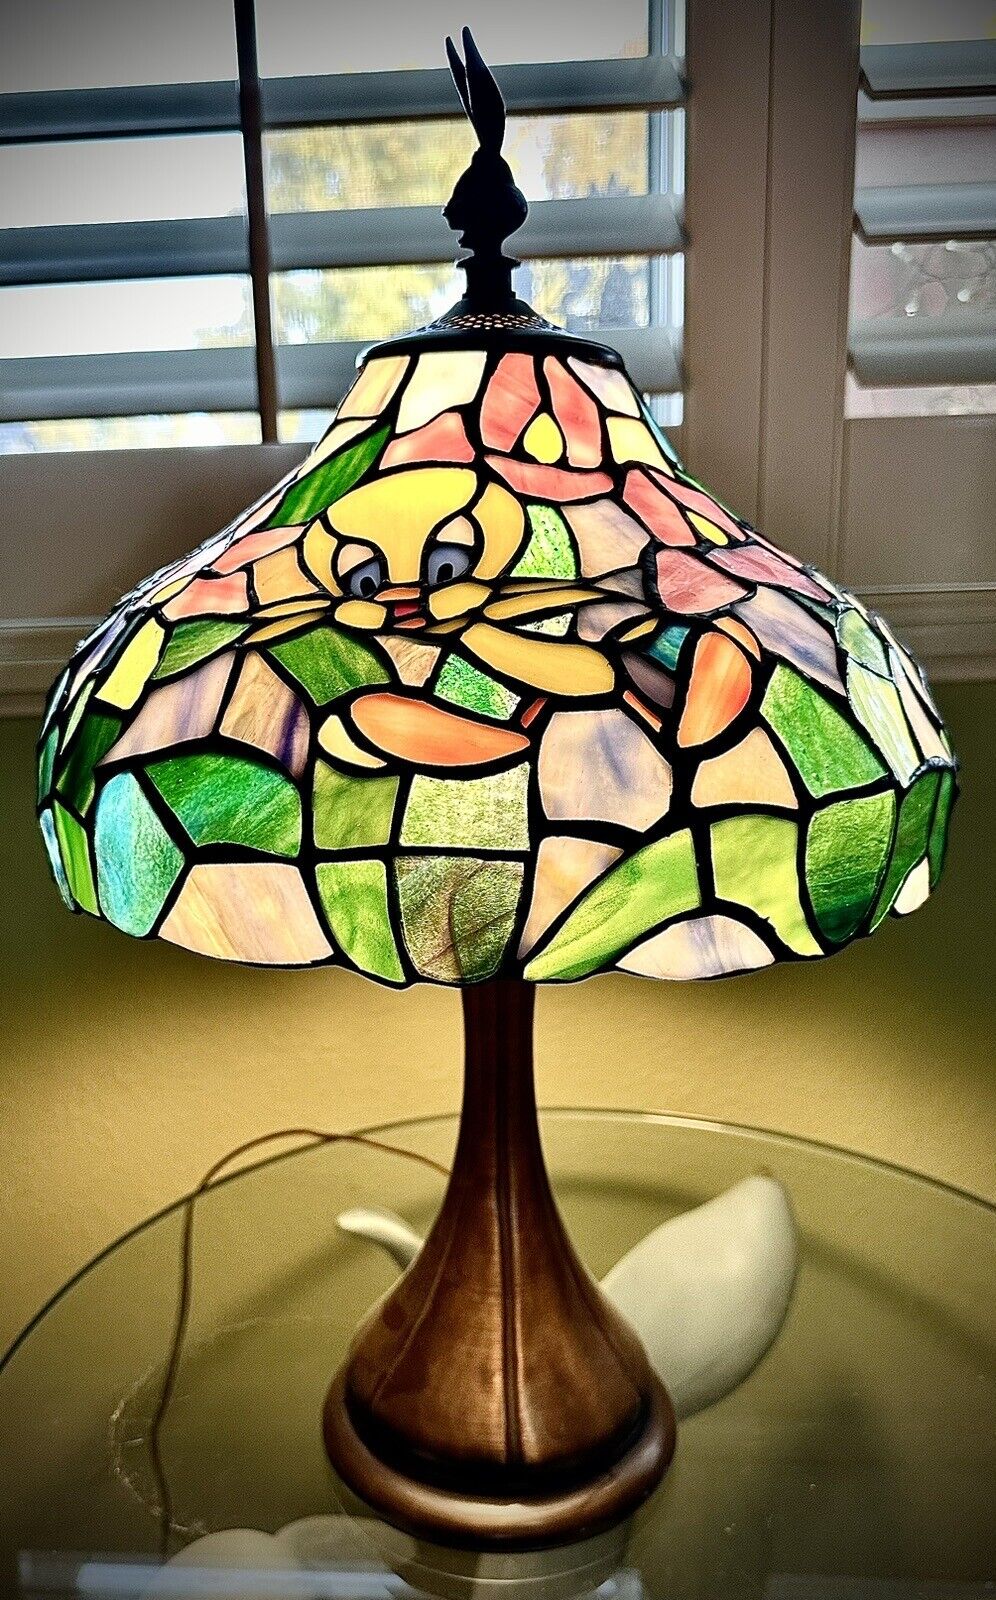 RARE Vintage Dale Tiffany Style Lamp Looney Tunes Stained Glass Warner Brothers